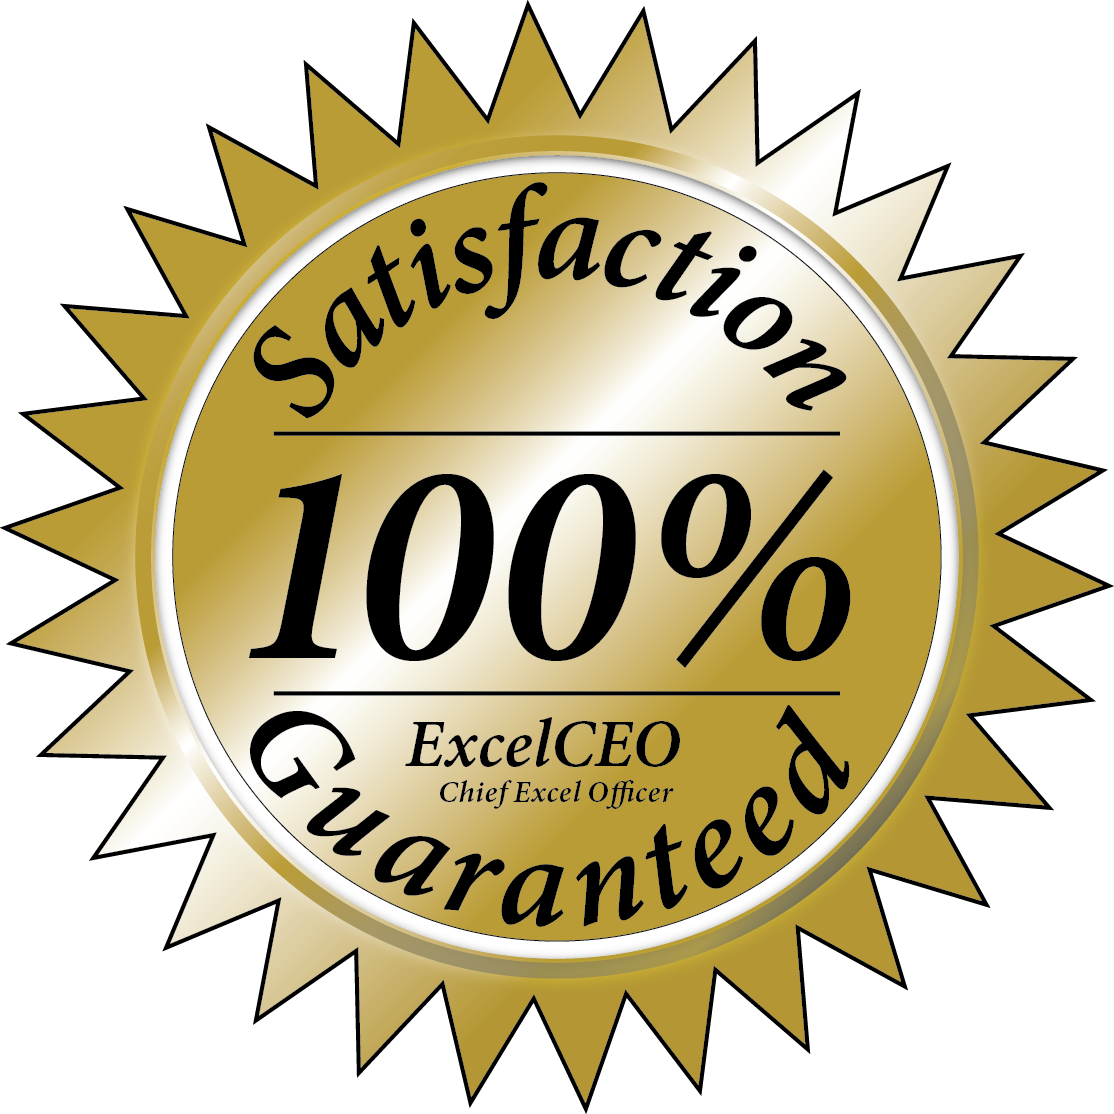 We are so confident you will learn so much with ExcelCEO training that we will make you our exclusive guarantee that does not exist ANYWHERE today.
                    	I have never taken a better Excel (or Access) course in all my life!
                        I have learned more in this course that is directly applicable to my job than any other course out there (if you are employed)!				
                        I will recommend this training to ANYONE who wants to become an Excel (or Access) Master!
                    After you finish the course, you will say the following:If, after you complete ExcelCEO course training, you don’t agree with these statements, ExcelCEO will refund 100% of your purchase price and you can keep the book! The only caveat is that you tell us the name of the other Excel (or Access) course you have taken that is better than ExcelCEO. Try finding that kind of guarantee with ANY other training provider!